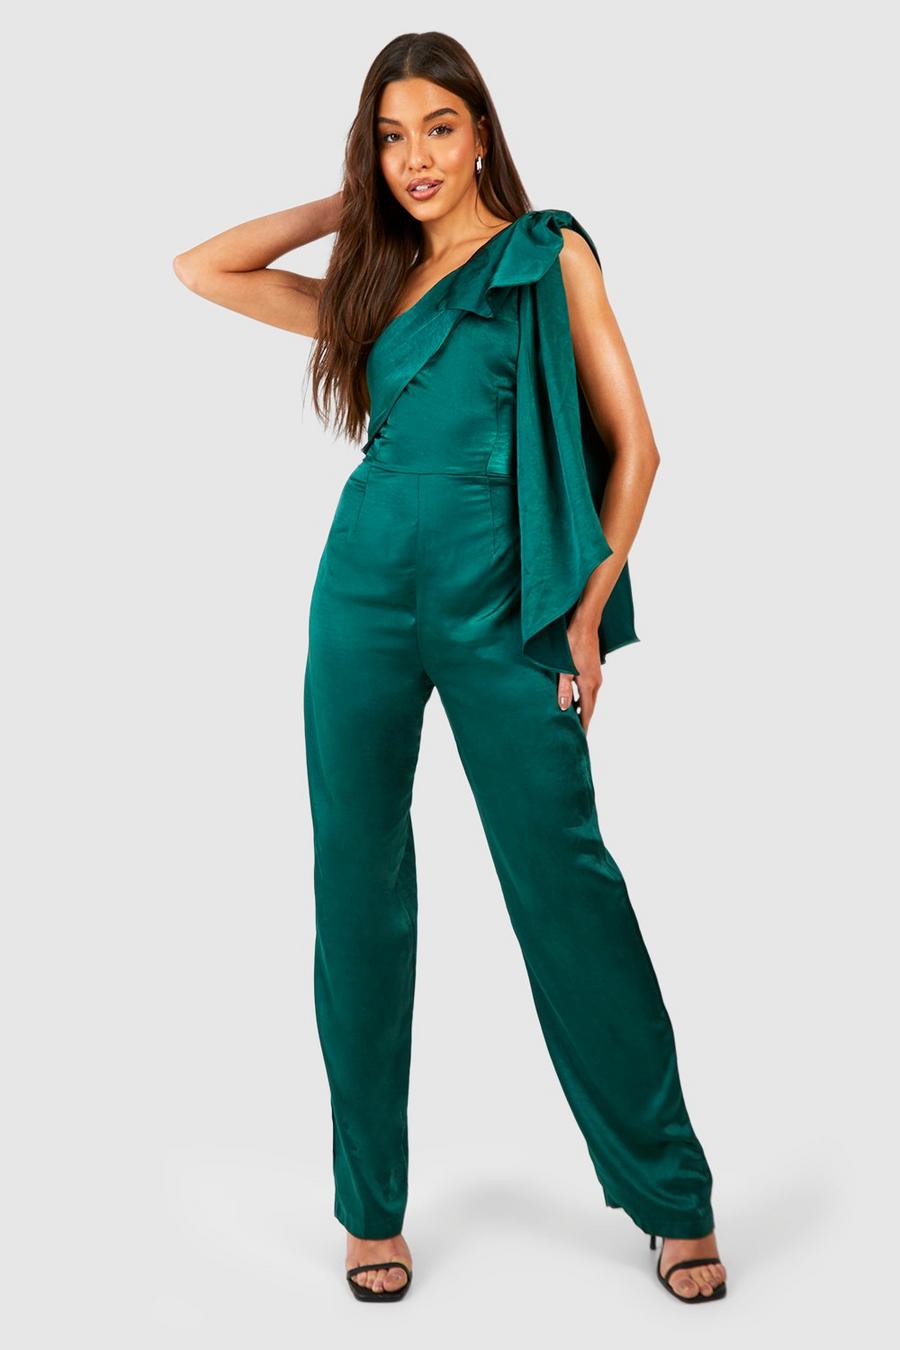 Teal Jumpsuits & Playsuits